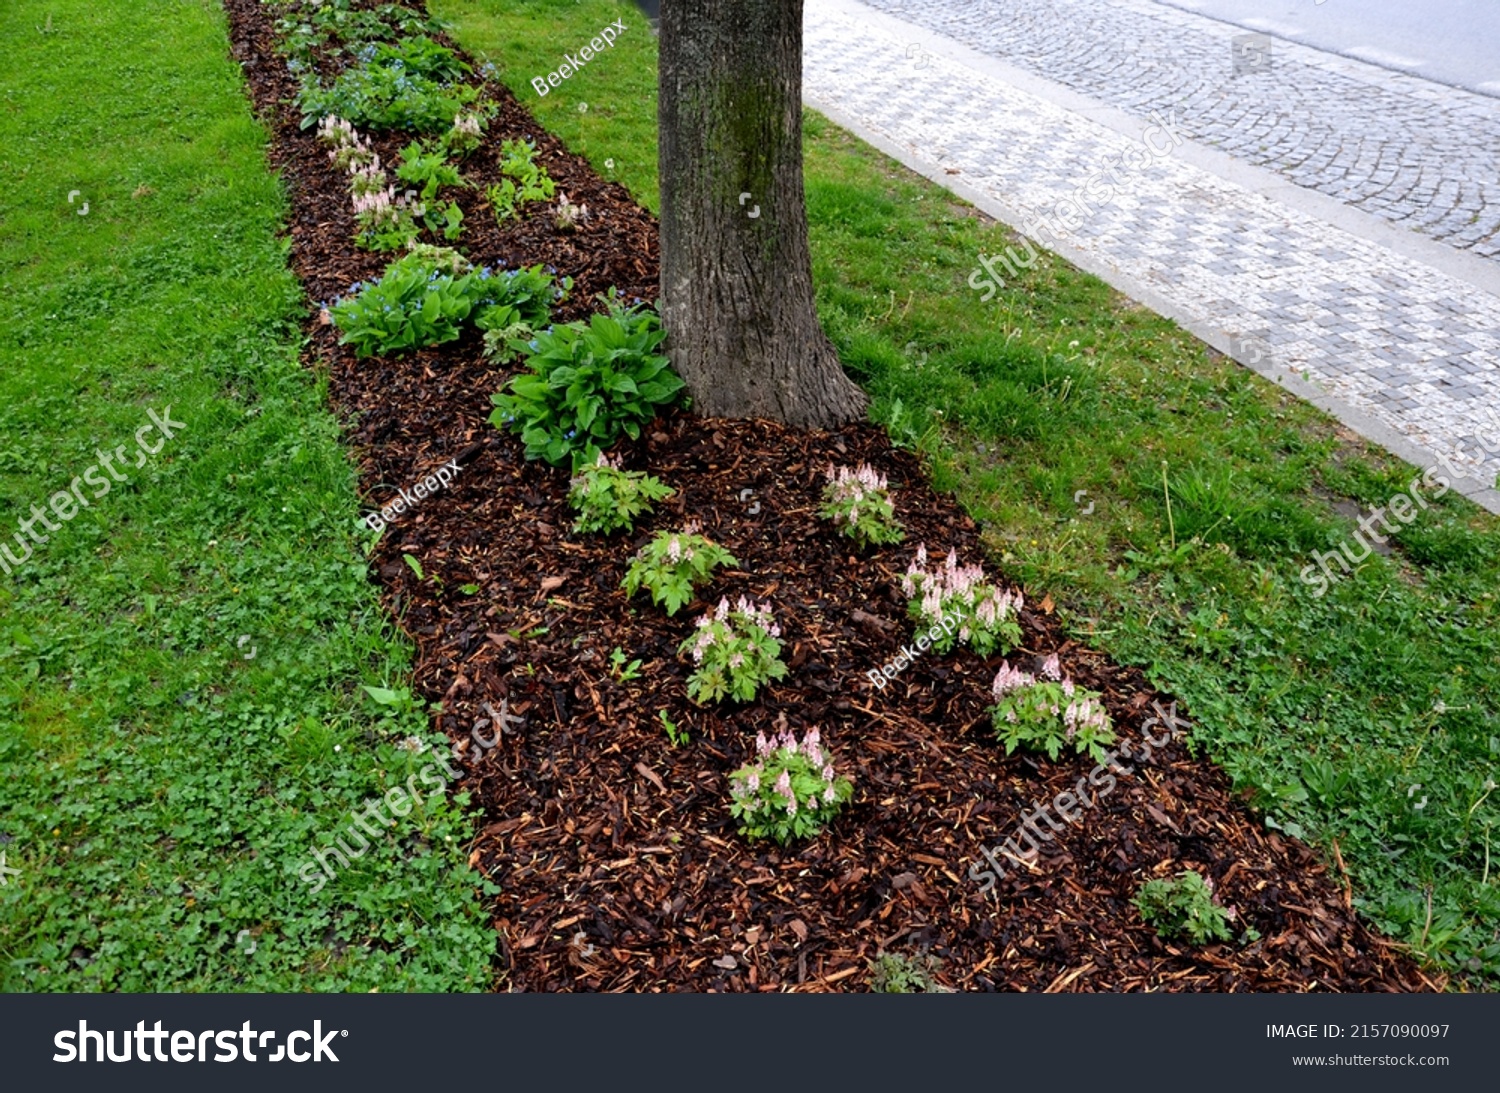 mulching undergrowth beds is necessary in terms of water evaporation. bark pulp protects against drying out and facilitates weed control #2157090097